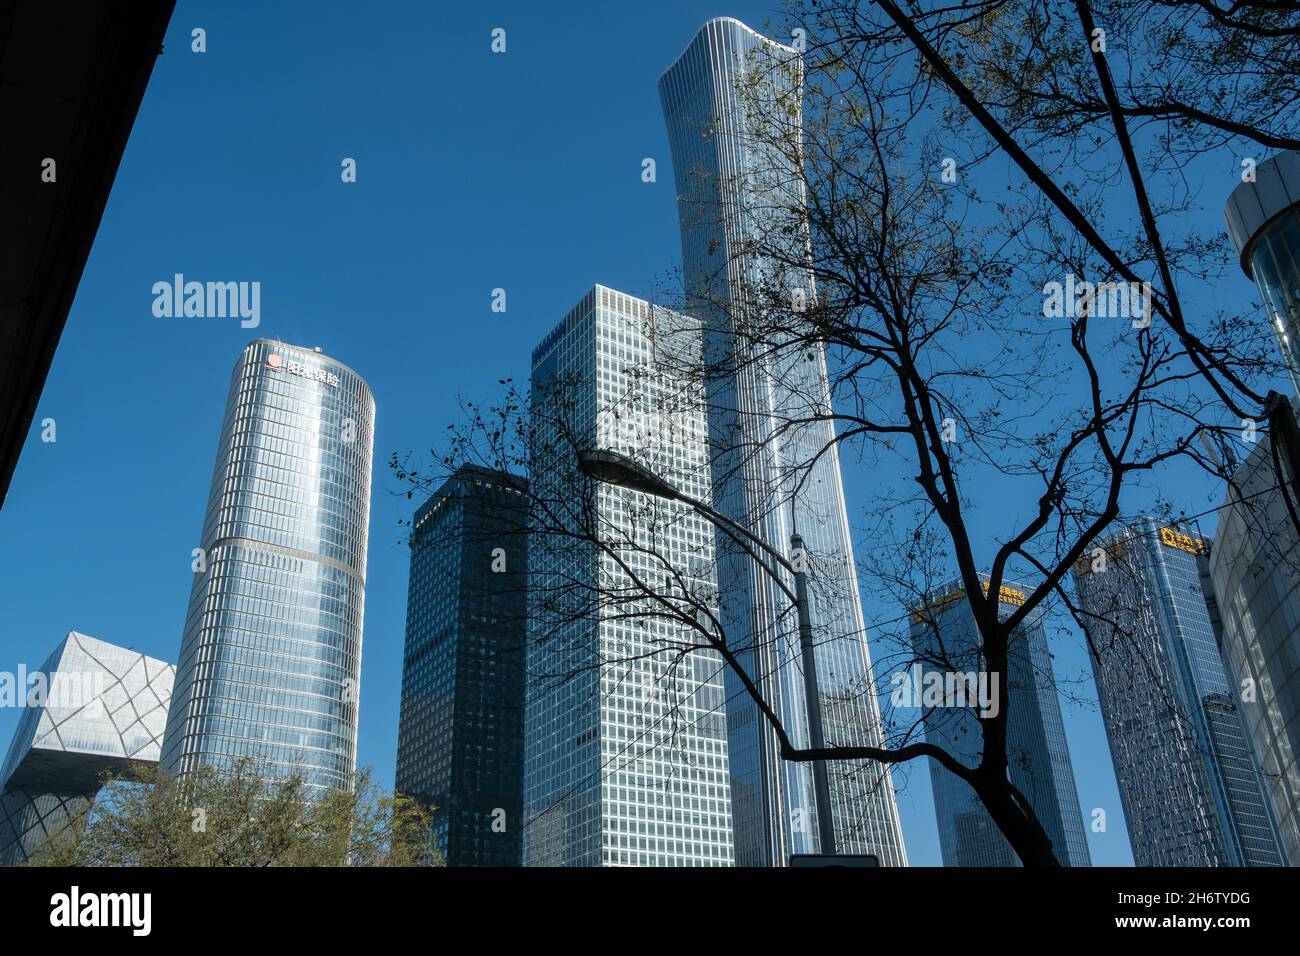 High-rise buildings in Beijing Central Business District (CBD). Stock Photo